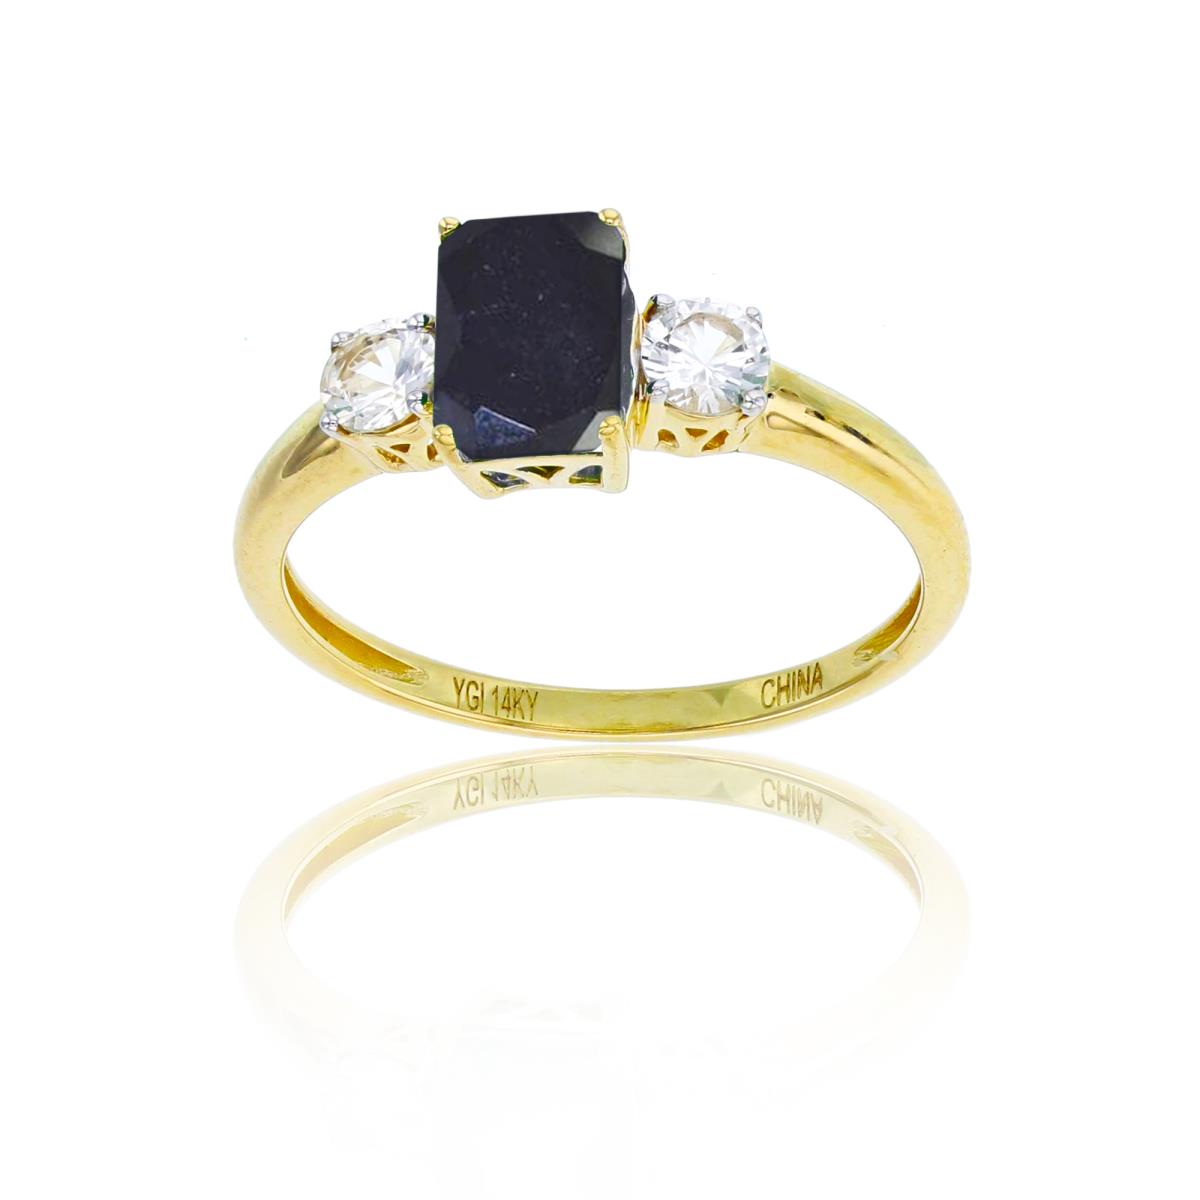 Sterling Silver Yellow 7x5mm Oct Onyx & 3.5mm Rnd White Topaz on Sides Ring